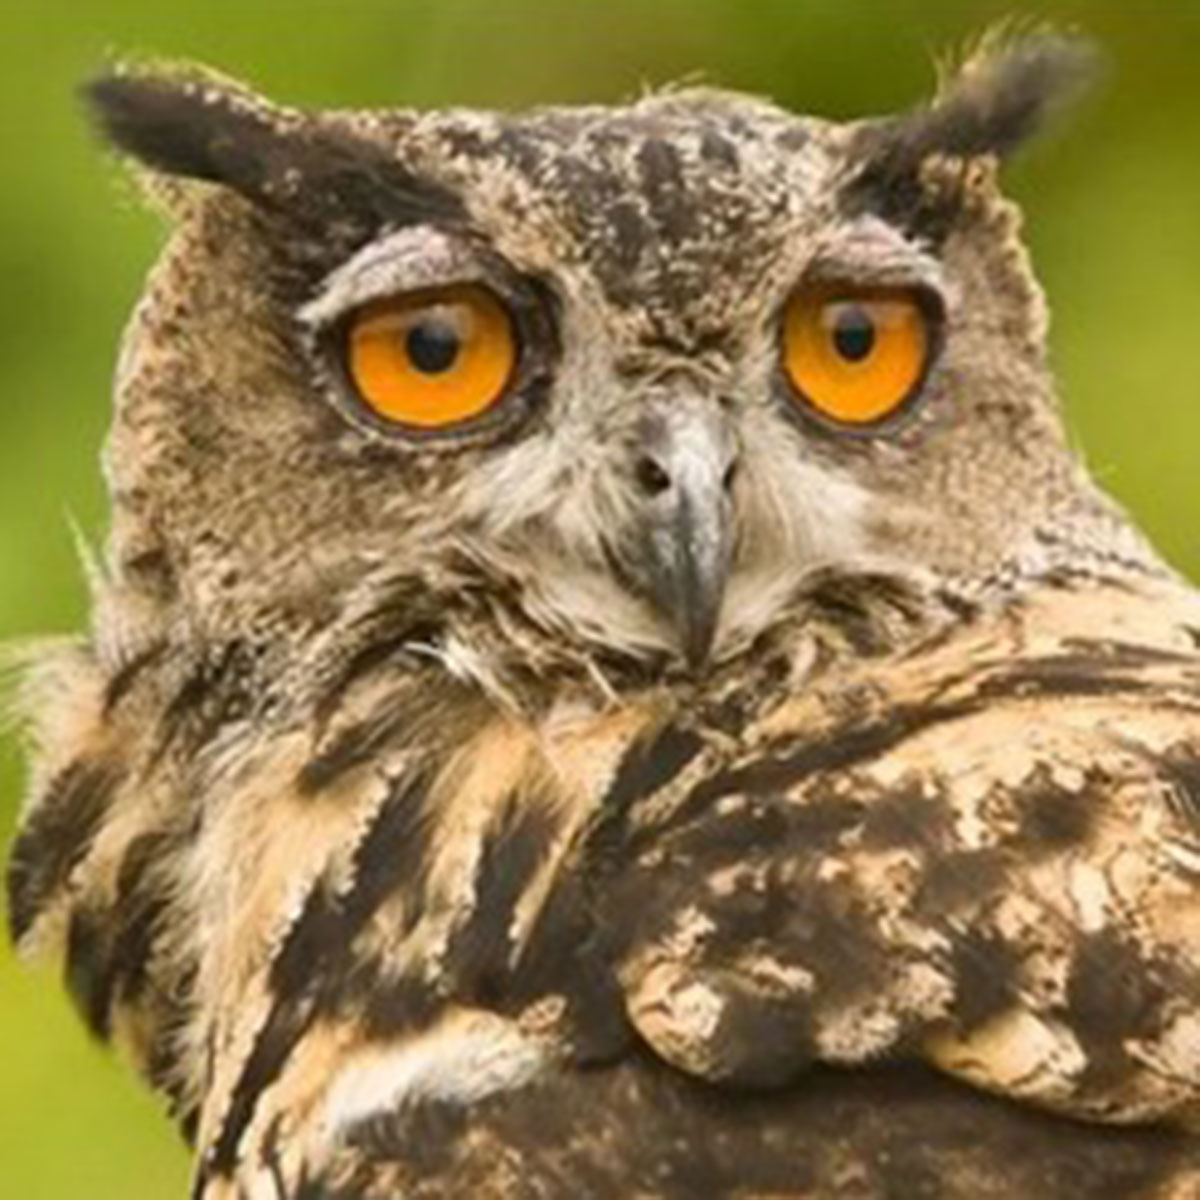 An owl with orange eyes and light and dark brown feathers, facing the camera